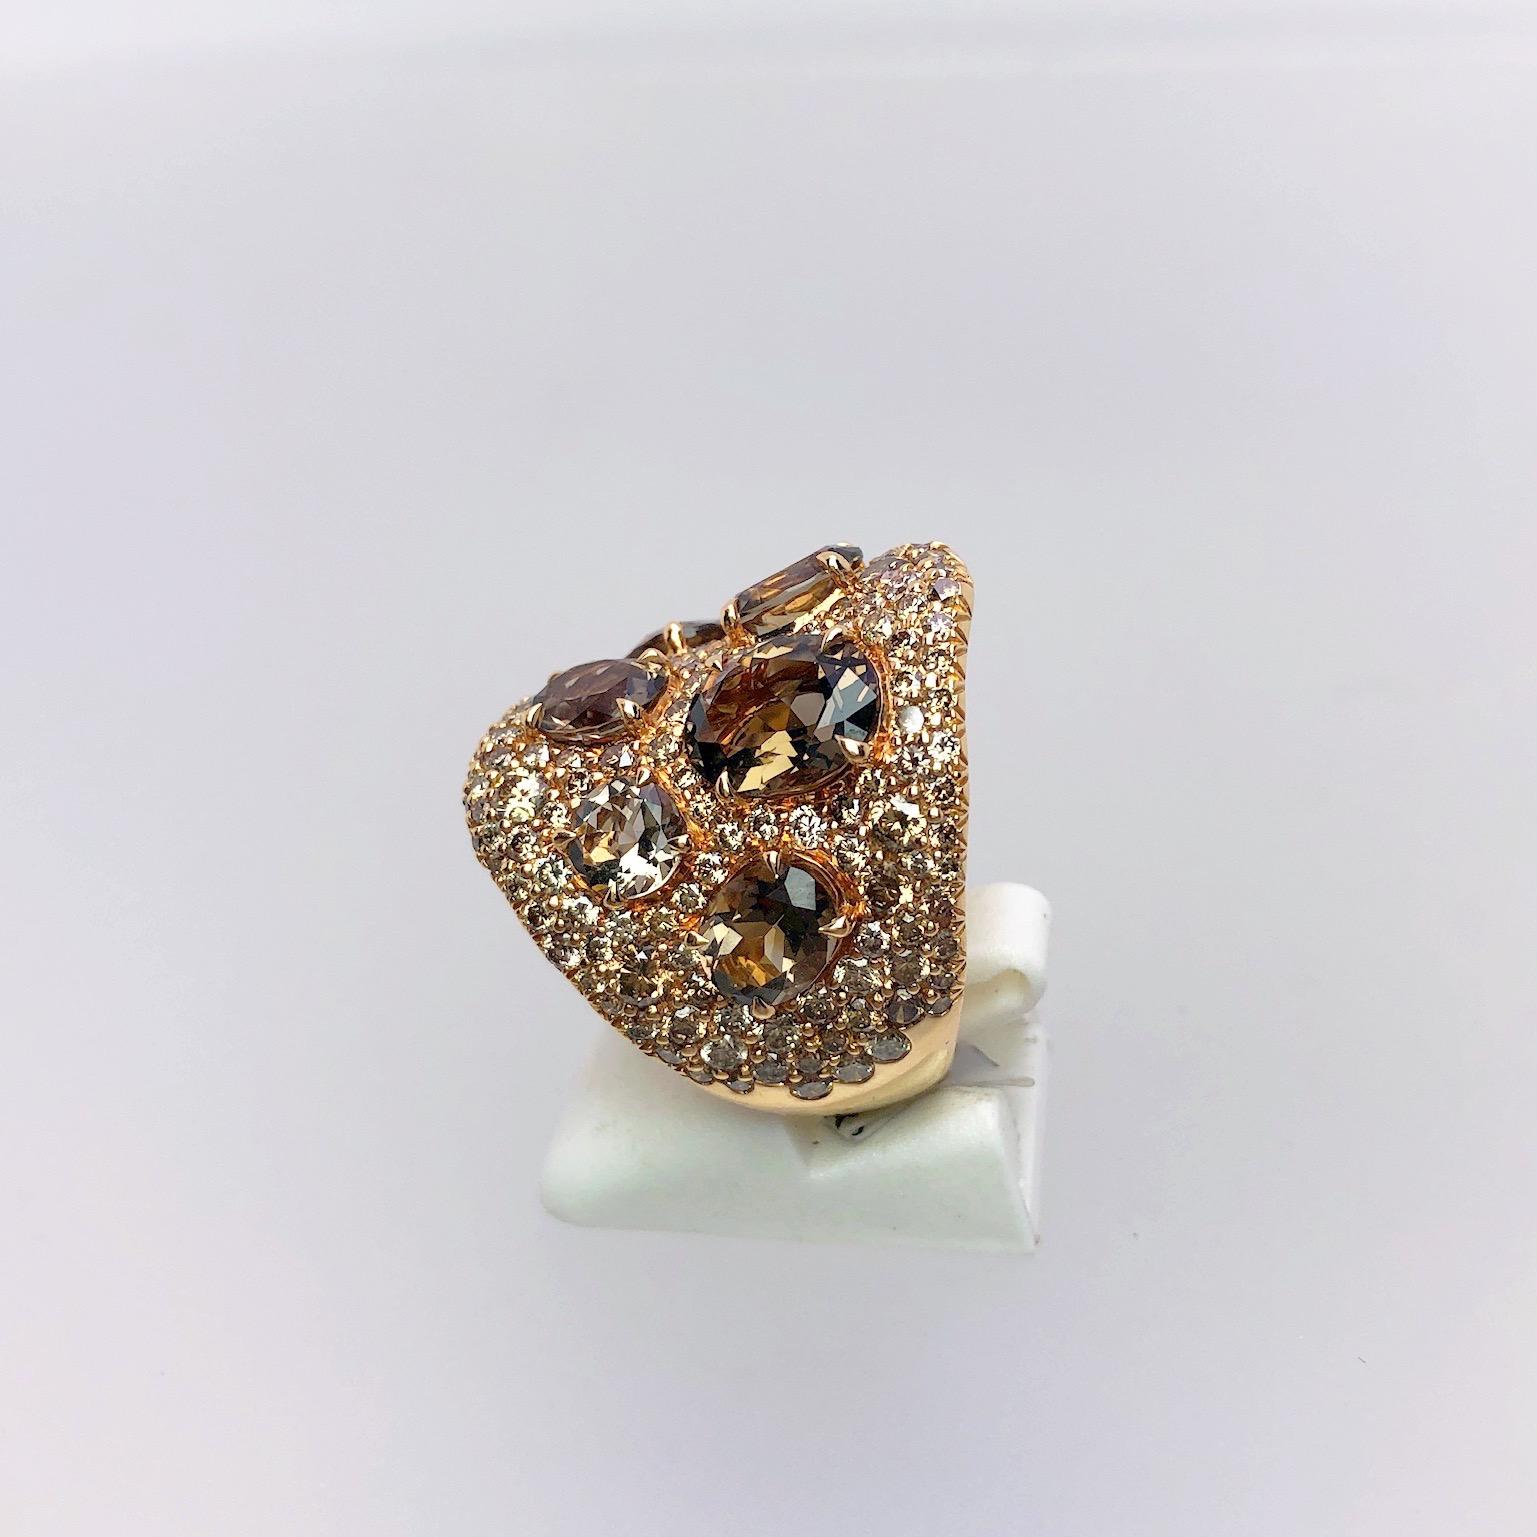 This 18 karat rose gold ring is pave set with Brown Diamonds . Oval Smokey Quartz stones are prong set throughout the 23.5mm band ring.
Brown Diamonds total 3.51 carats
Smokey Quartz total 5.83 carats
Ring size 7.5
Stamped 18K
Appraisal upon request